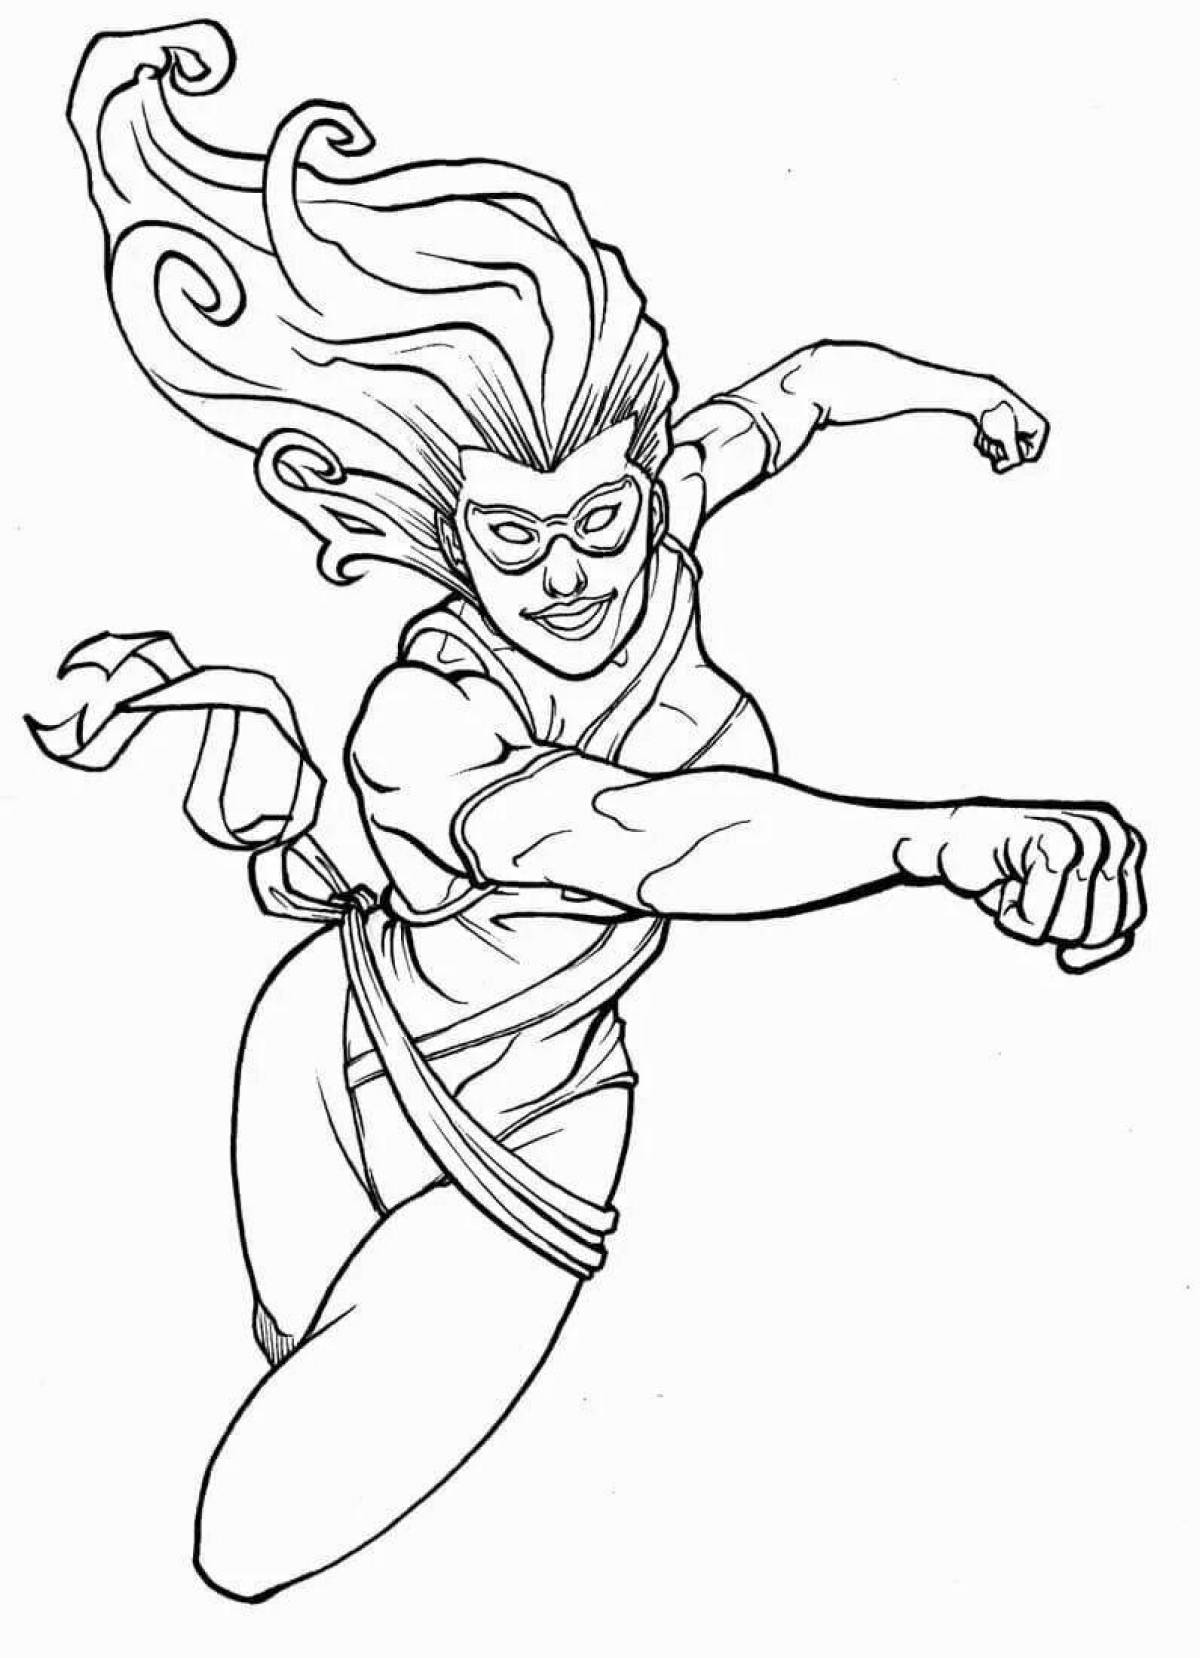 Captain Marvel coloring book